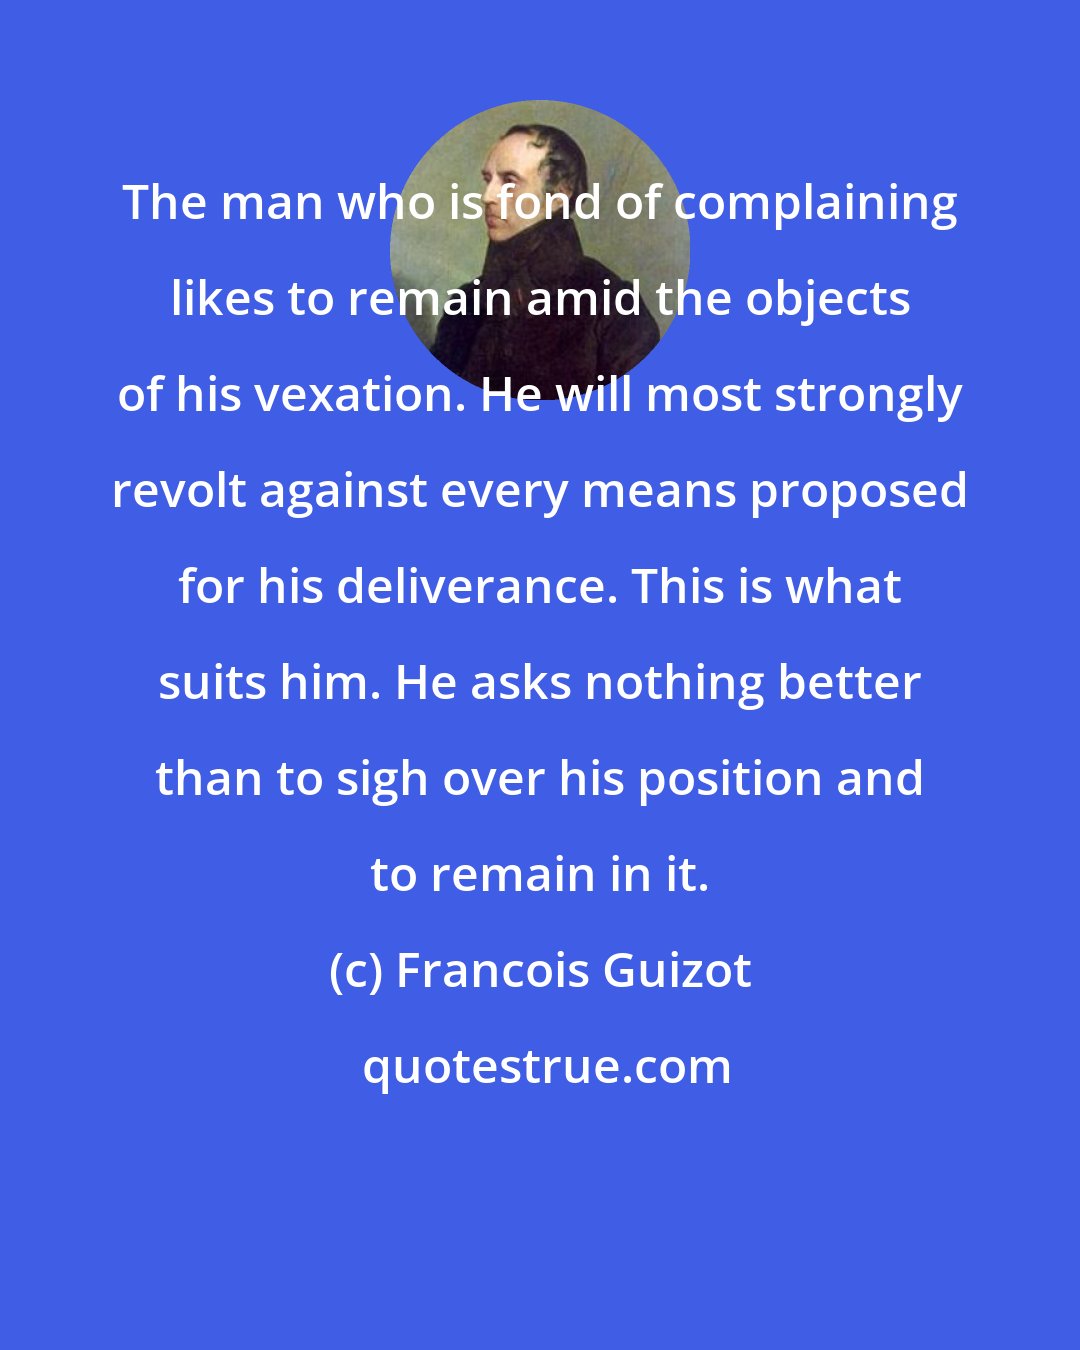 Francois Guizot: The man who is fond of complaining likes to remain amid the objects of his vexation. He will most strongly revolt against every means proposed for his deliverance. This is what suits him. He asks nothing better than to sigh over his position and to remain in it.